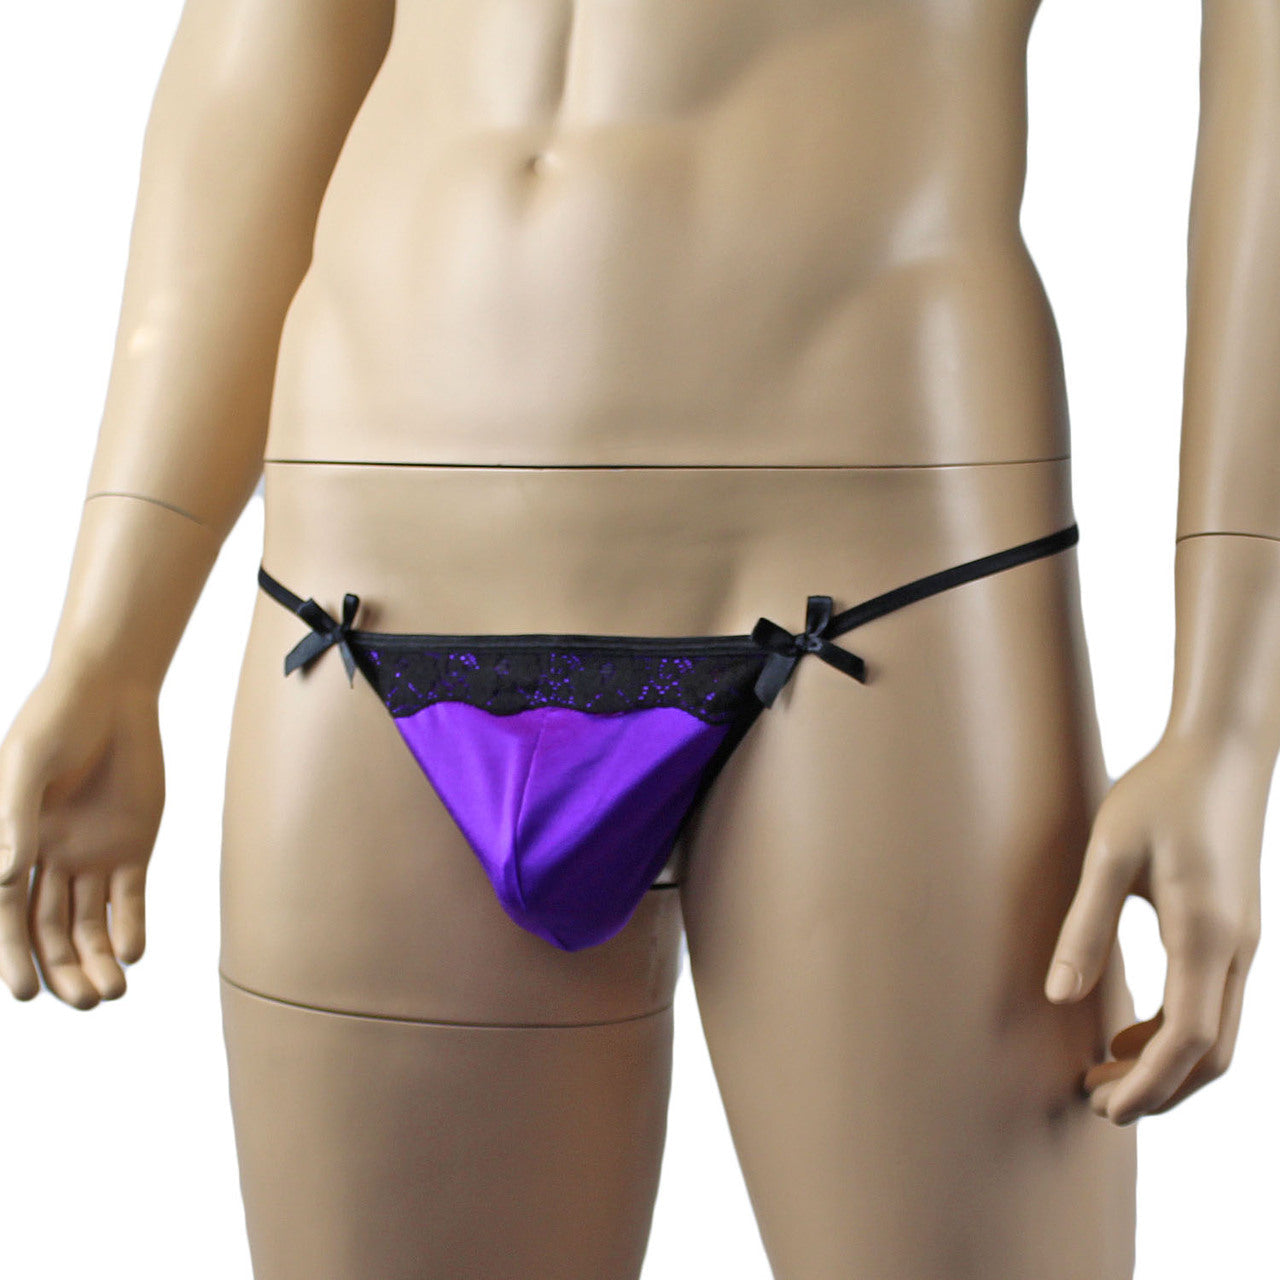 Mens Feminine Satin, Lace and Bow Pouch G string Purple and Black